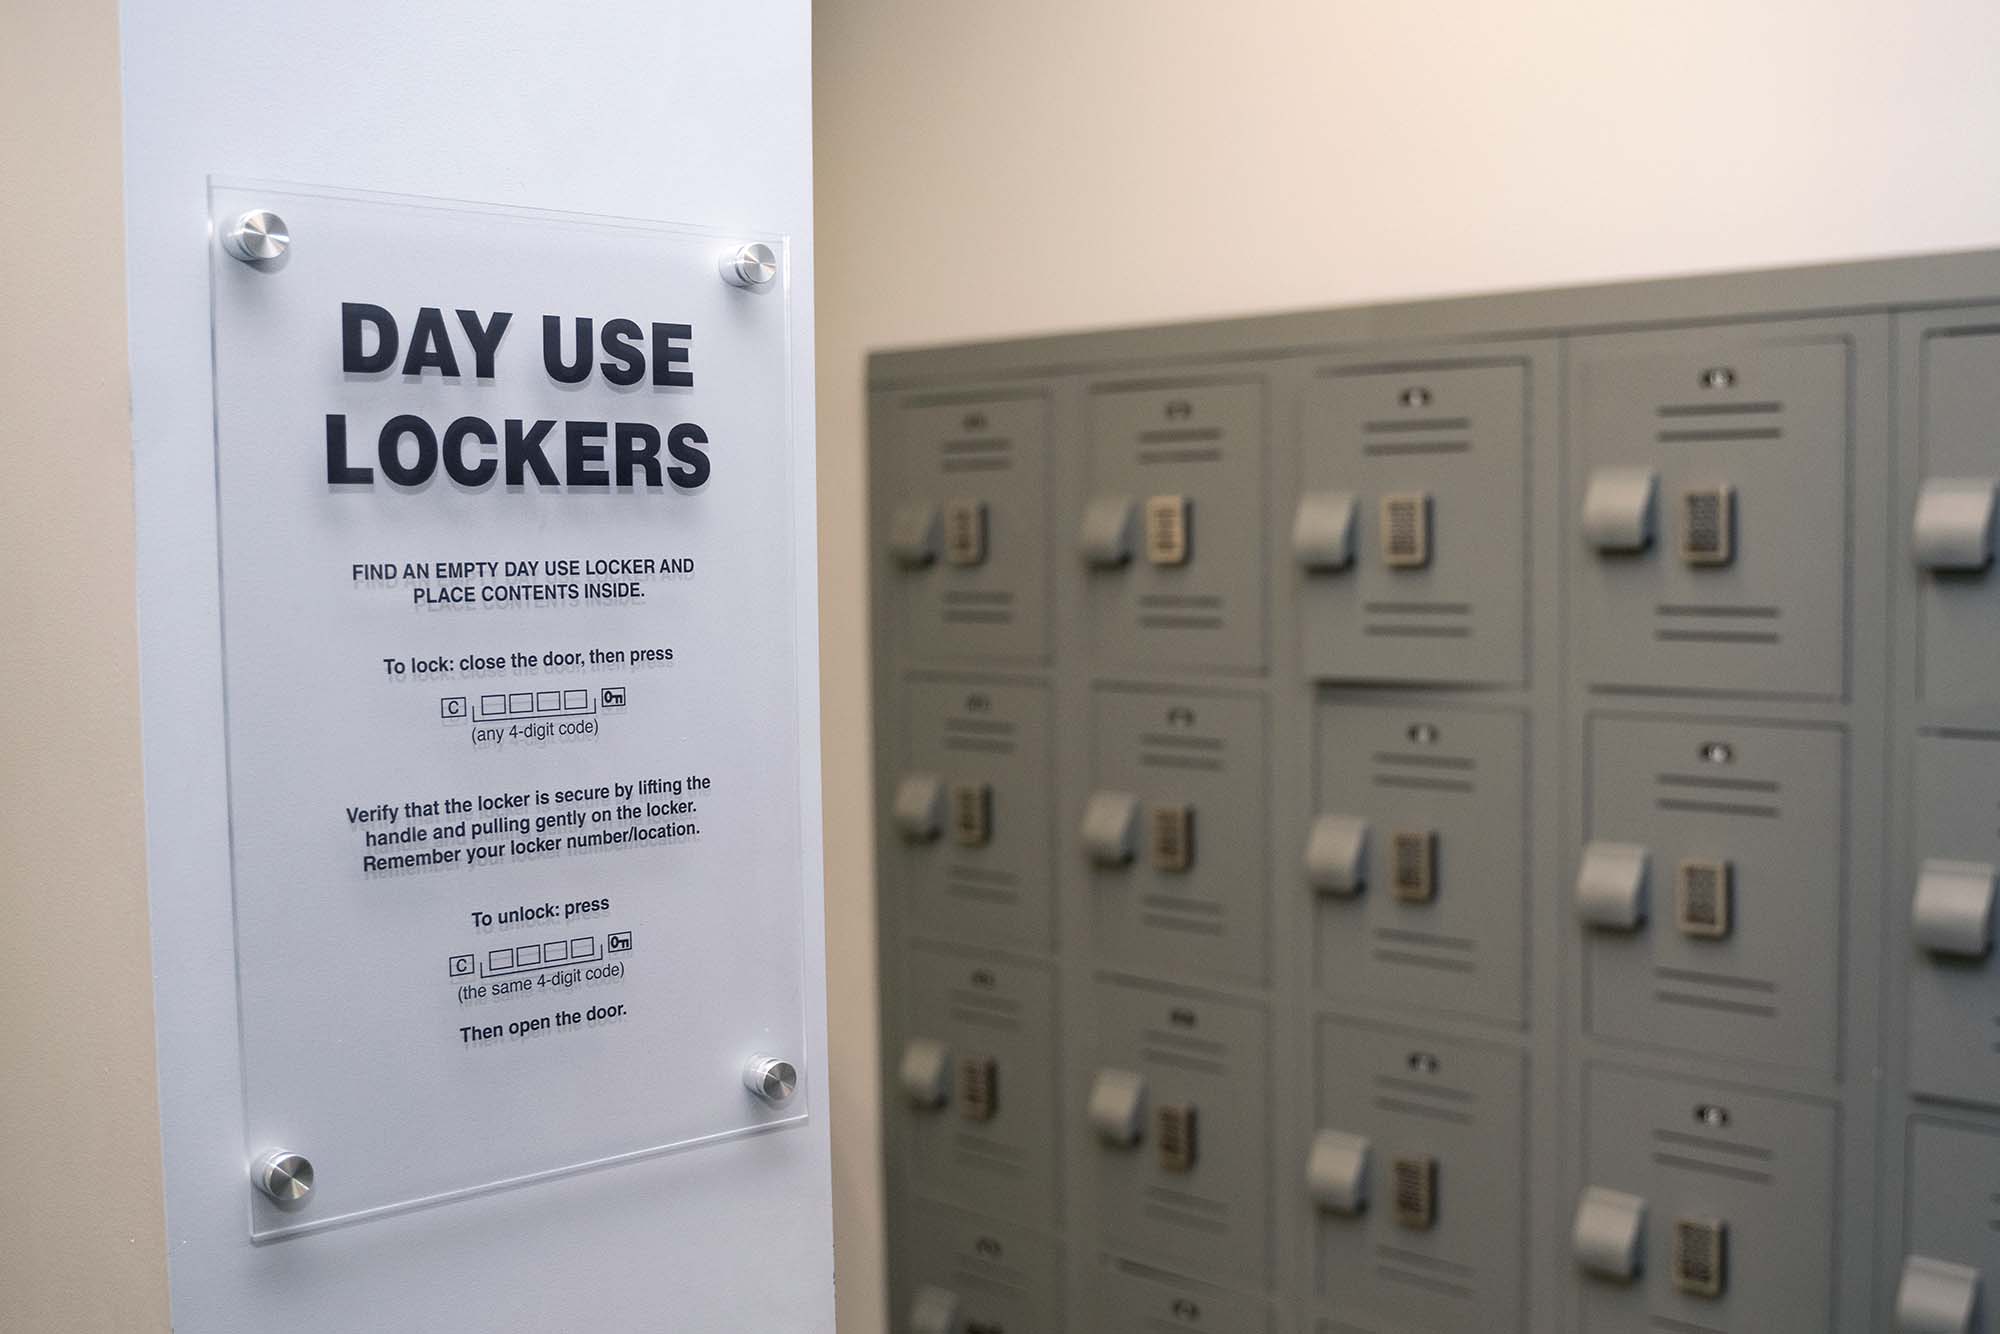 Day use locker instructional signage on a wall